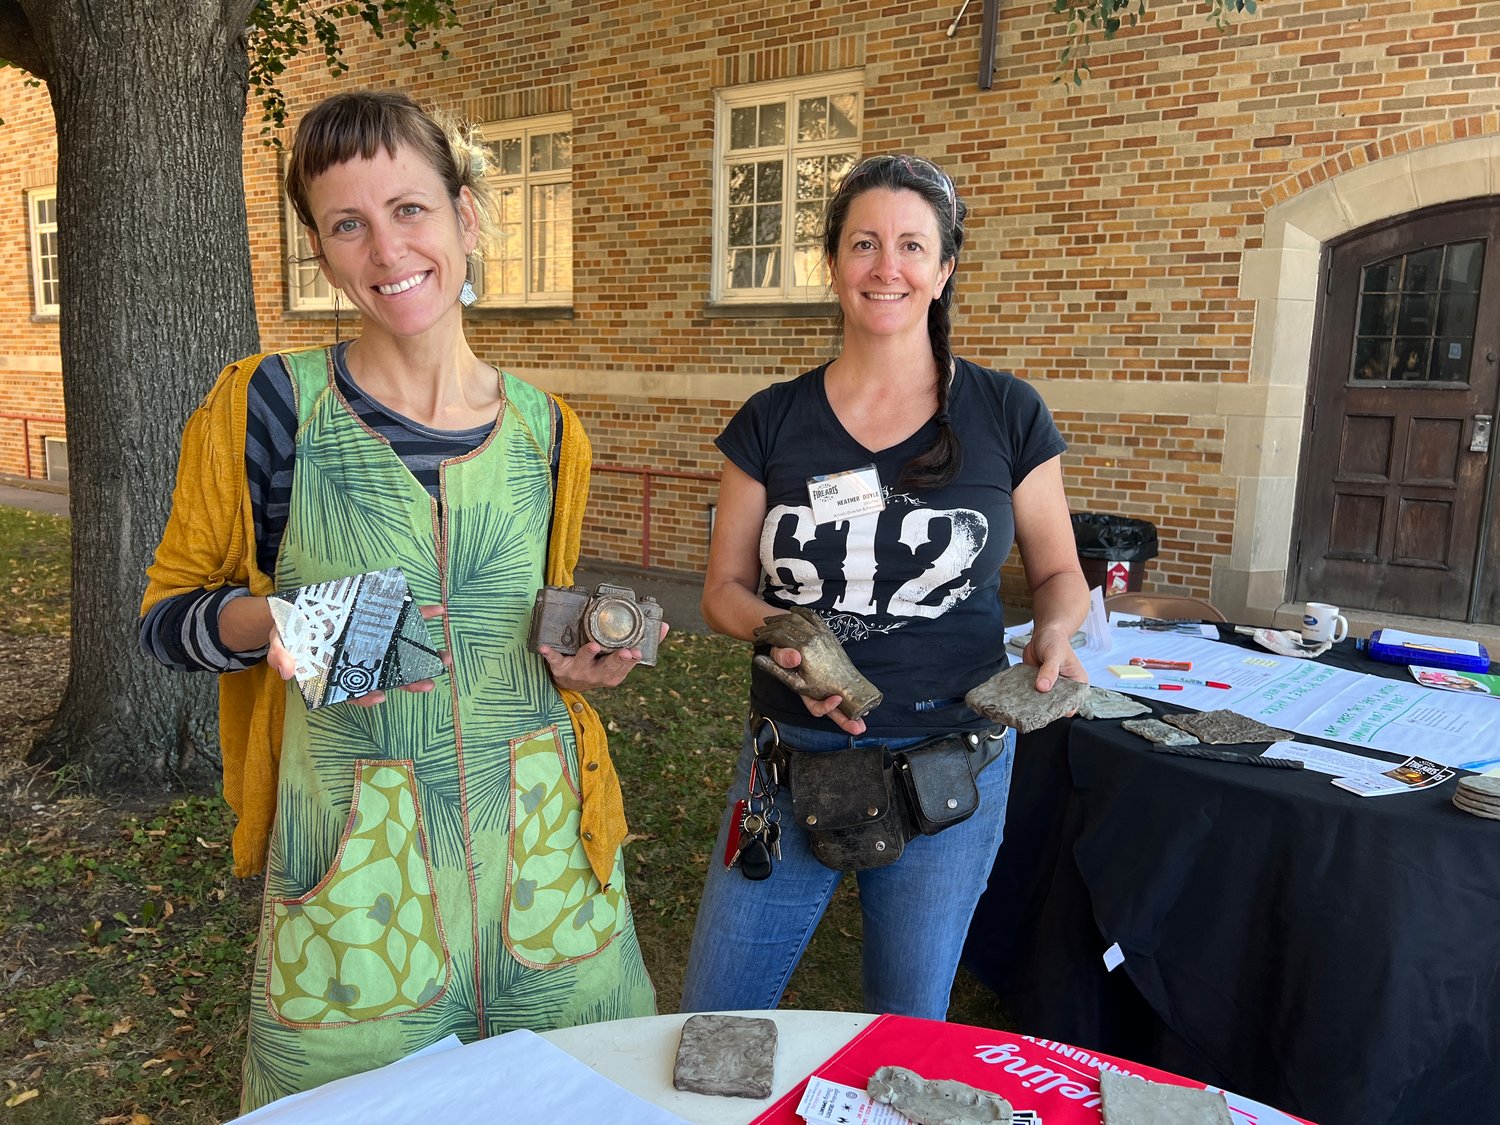 To show examples, volunteer coordinator and instructor Jess Berman Tank (above left) and CAFAC artistic director and founder Heather Doyle shared art forms cast from objects selected by George Floyd Square community members as meaningful to them. Shown here, from left to right, is an enamel design, metal casts of photographer Billy Brigg’s camera and caretaker Jeanelle Austin’s hand, and a texture pressed in clay.